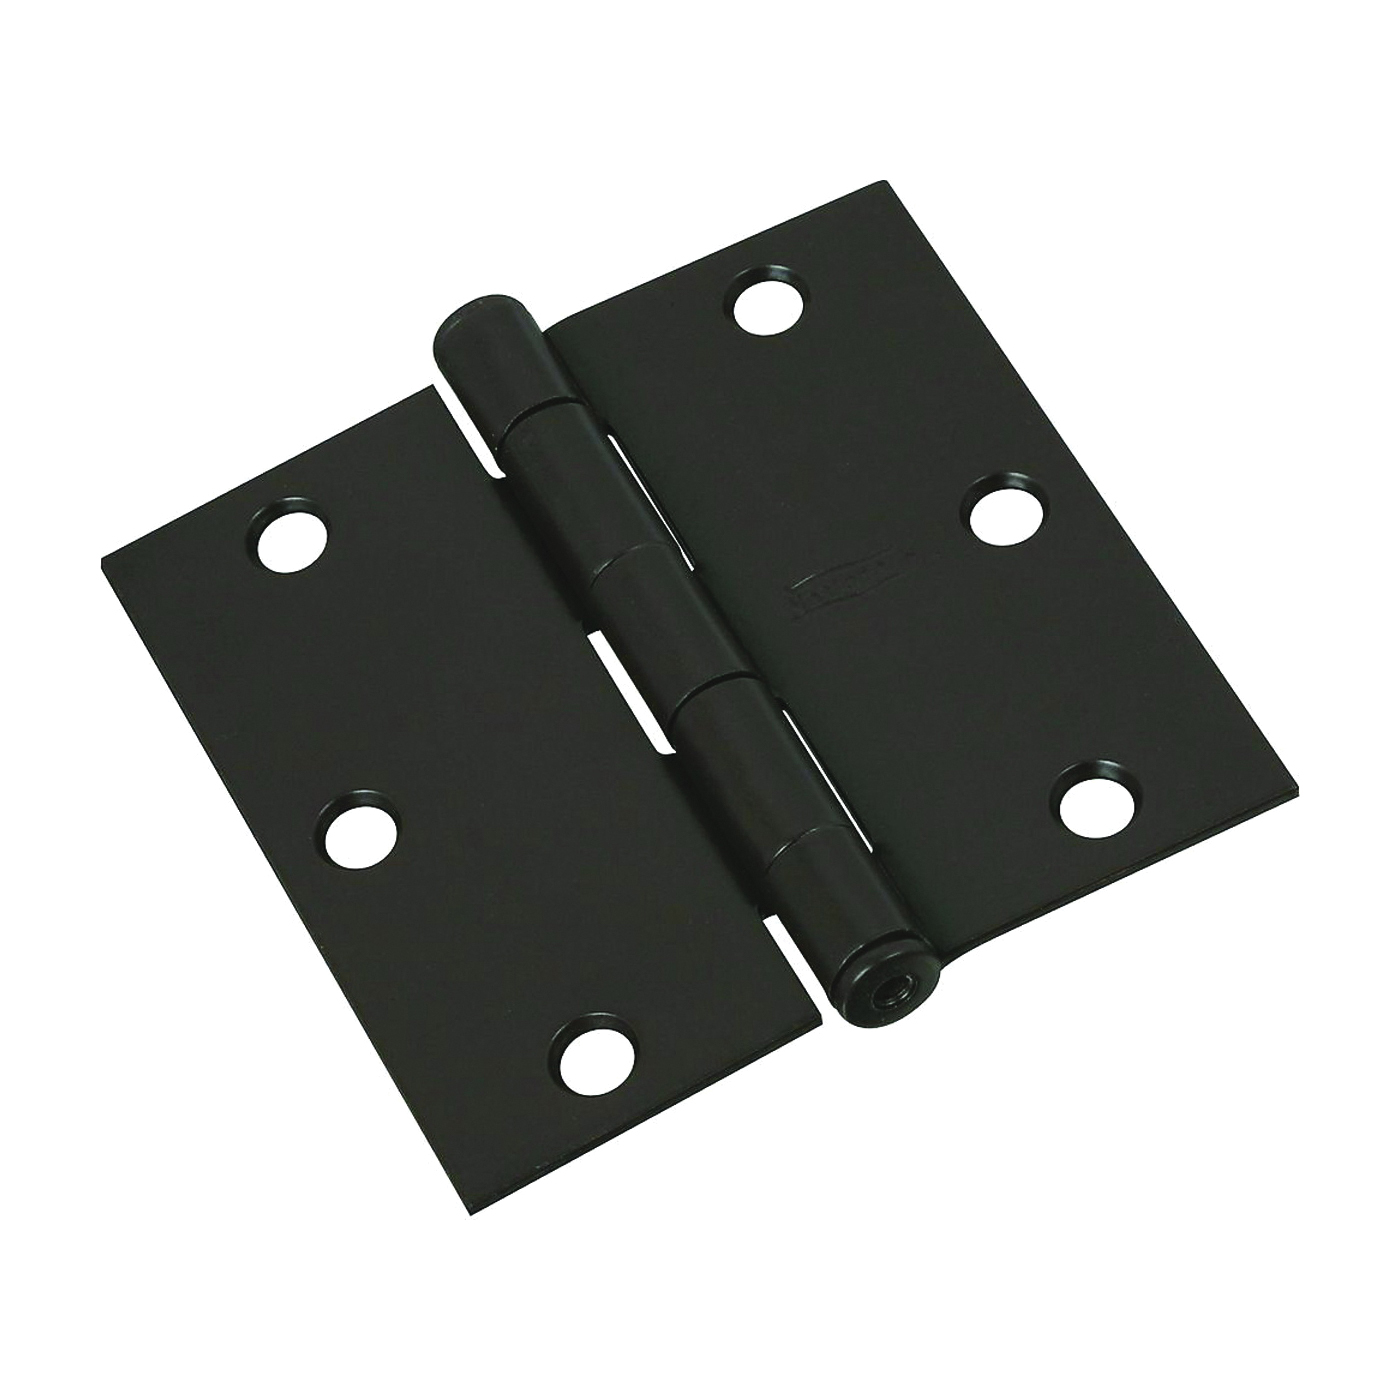 N830-205 Door Hinge, Cold Rolled Steel, Oil-Rubbed Bronze, Non-Rising, Removable Pin, 50 lb